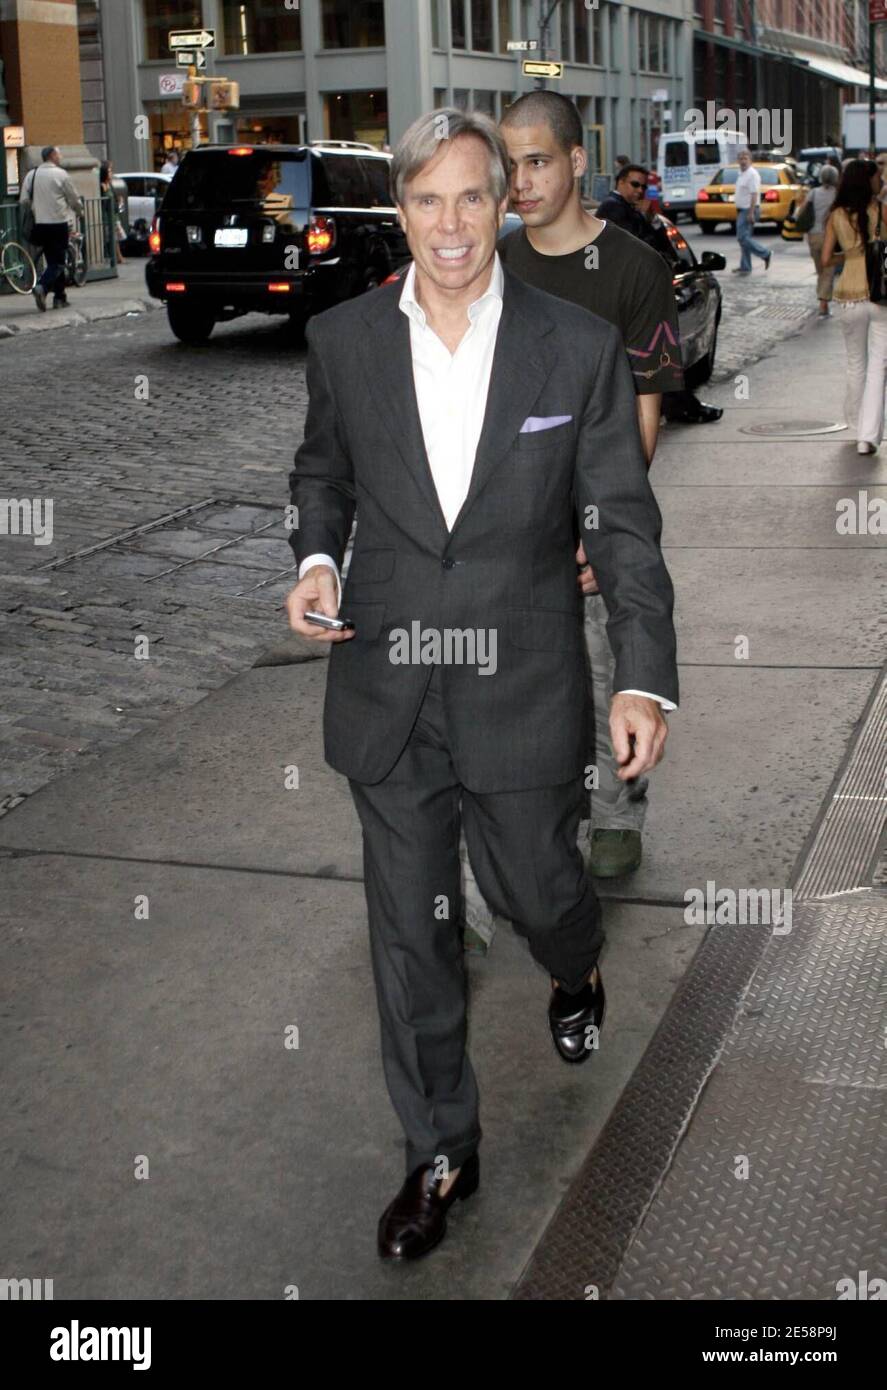 Tommy Hilfiger and son Rich, who is co-ceo of Young Rich and Famous  Entertainment, make their way back into a hotel in Soho, NY. 10/4/07.  [[faa]] Stock Photo - Alamy